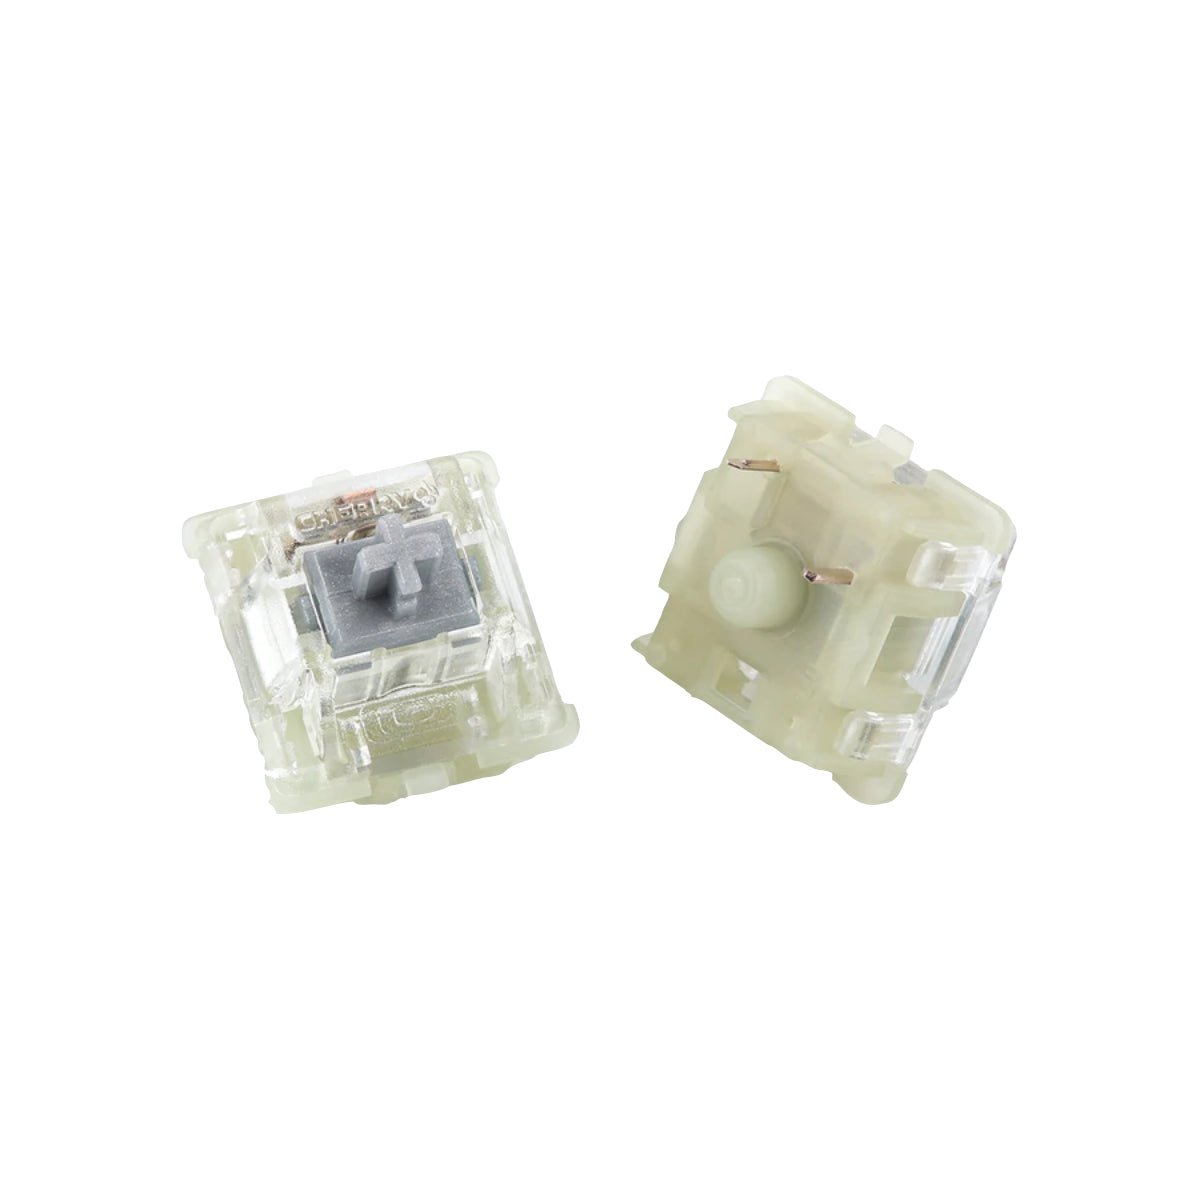 KBD Fans Cherry RGB Switches - Silver - Store 974 | ستور ٩٧٤